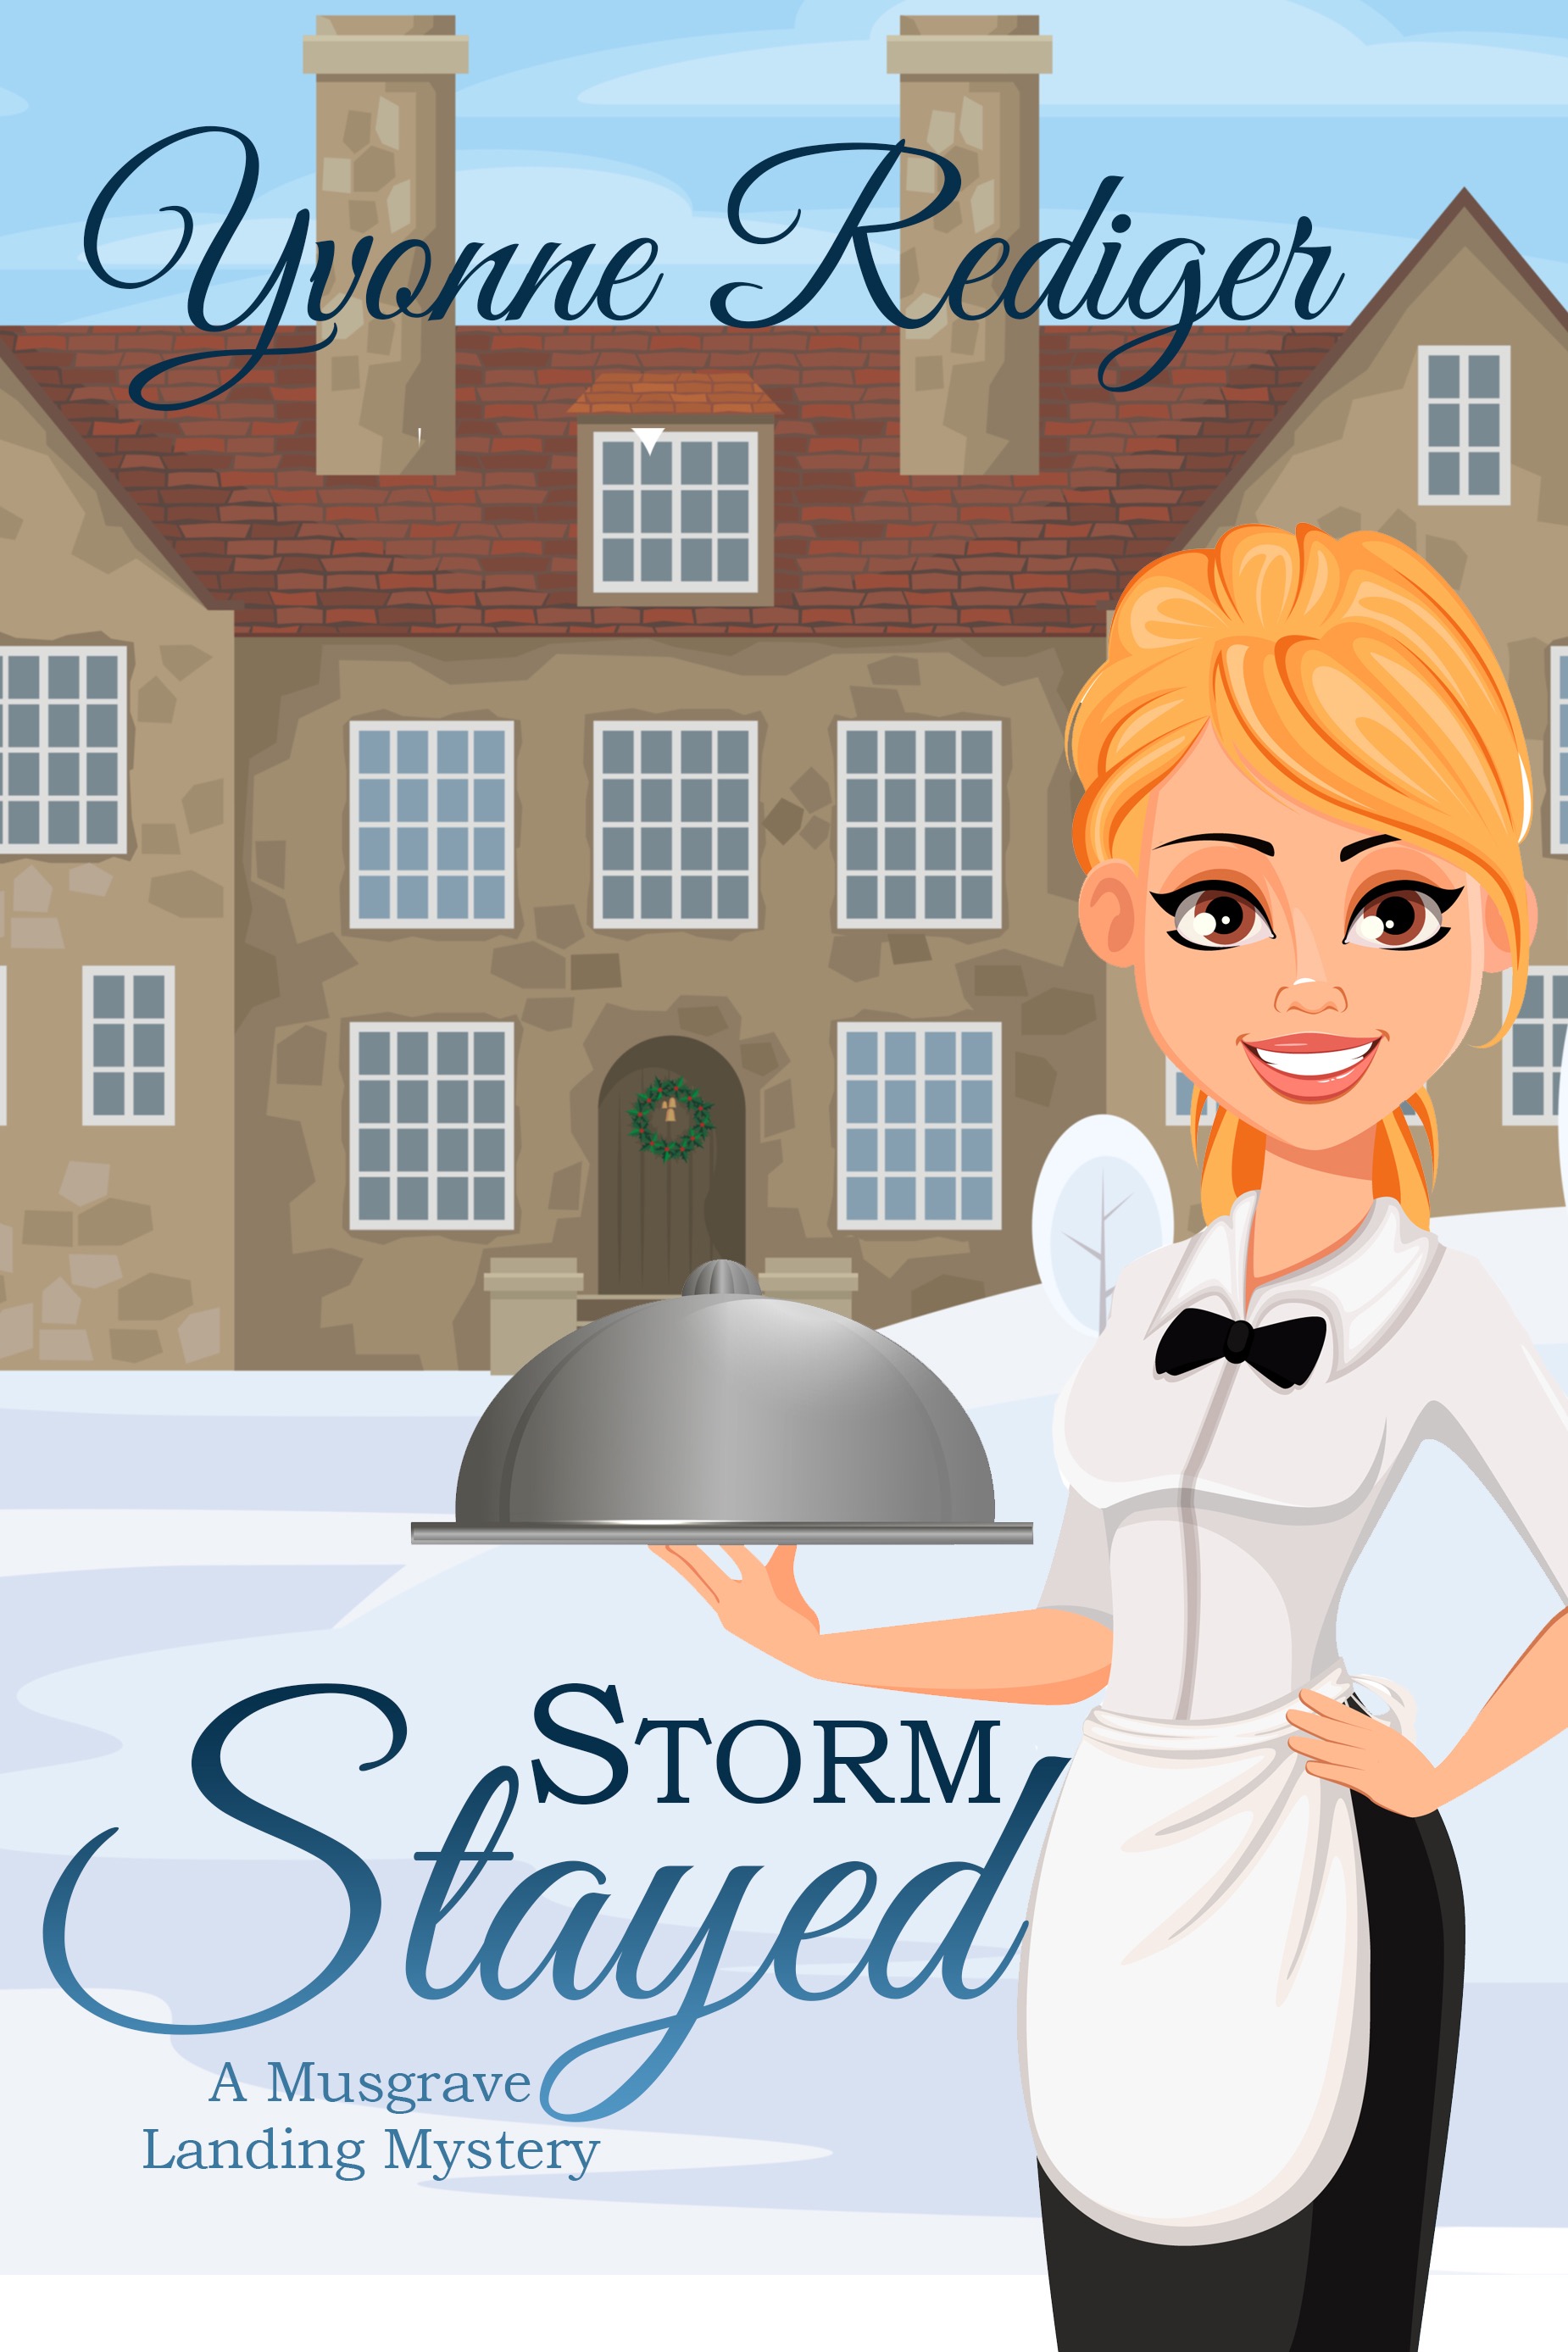 New Release - Storm Stayed, Musgrave Landing Mysteries 